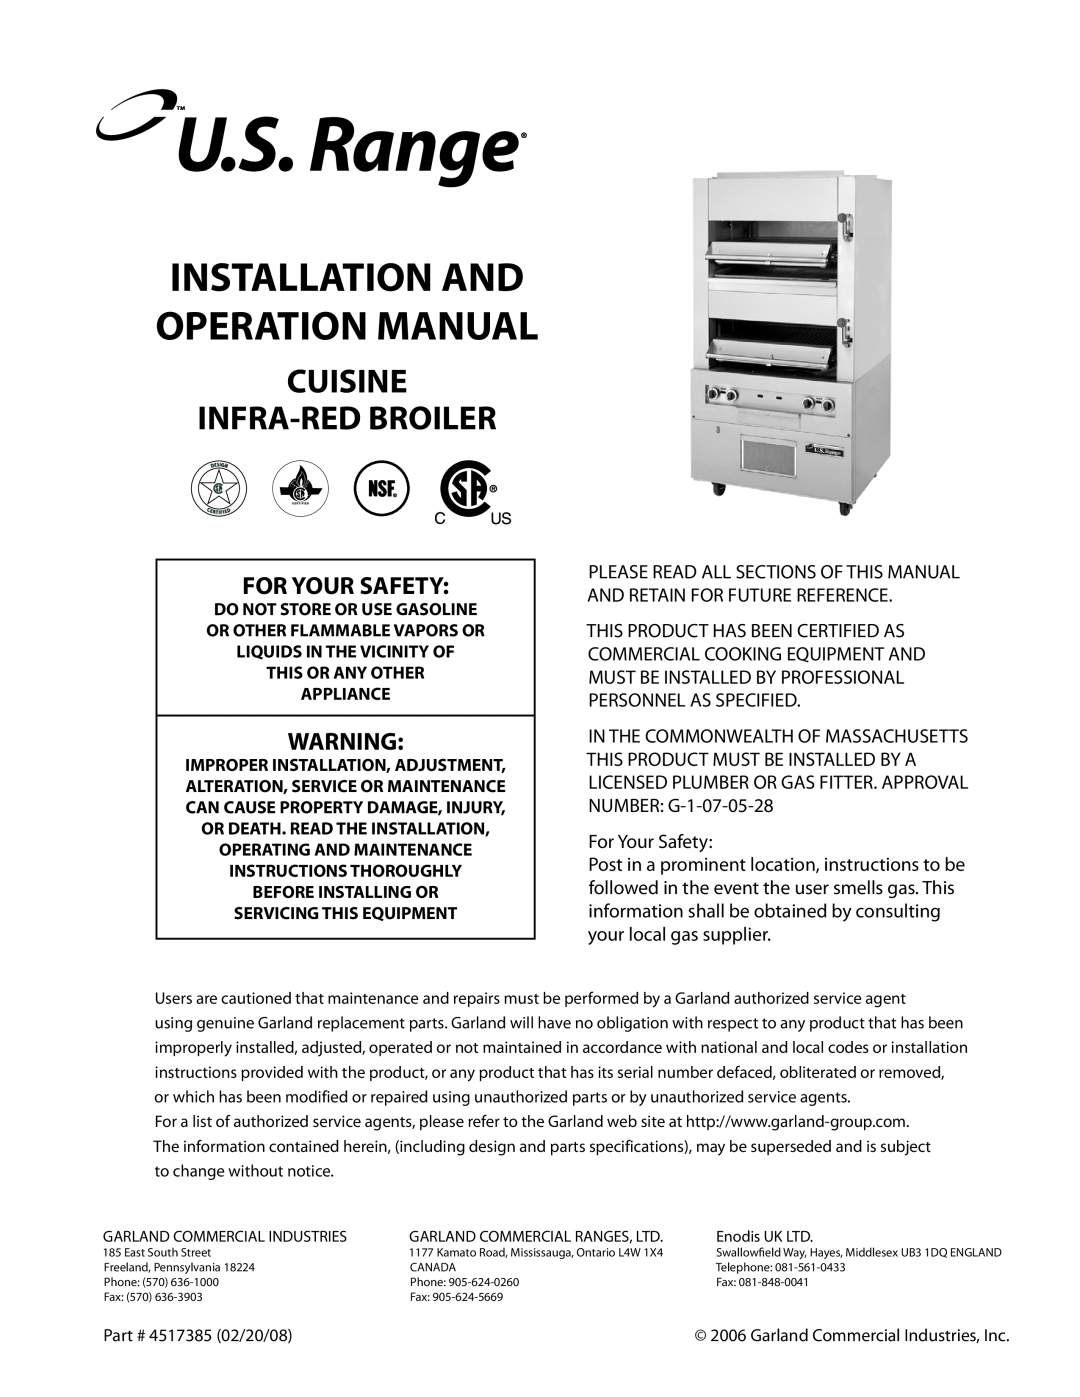 Garland operation manual For Your Safety, Cuisine Infra-Red Broiler 